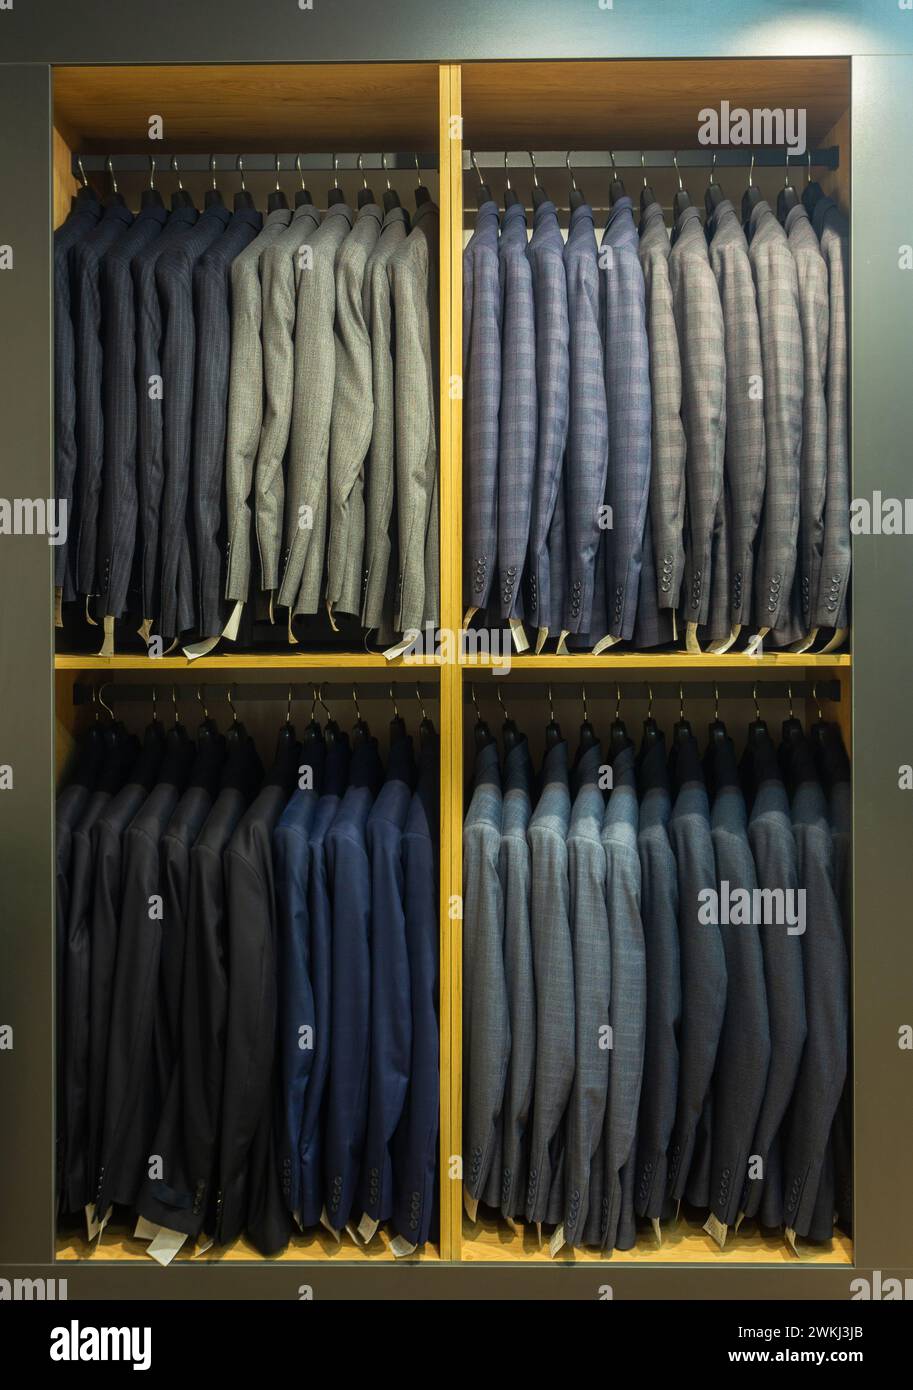 A row of men's suits, jackets hanging on a rack for display. Elegant man suit jackets hanging in a row on hangers. Stock Photo